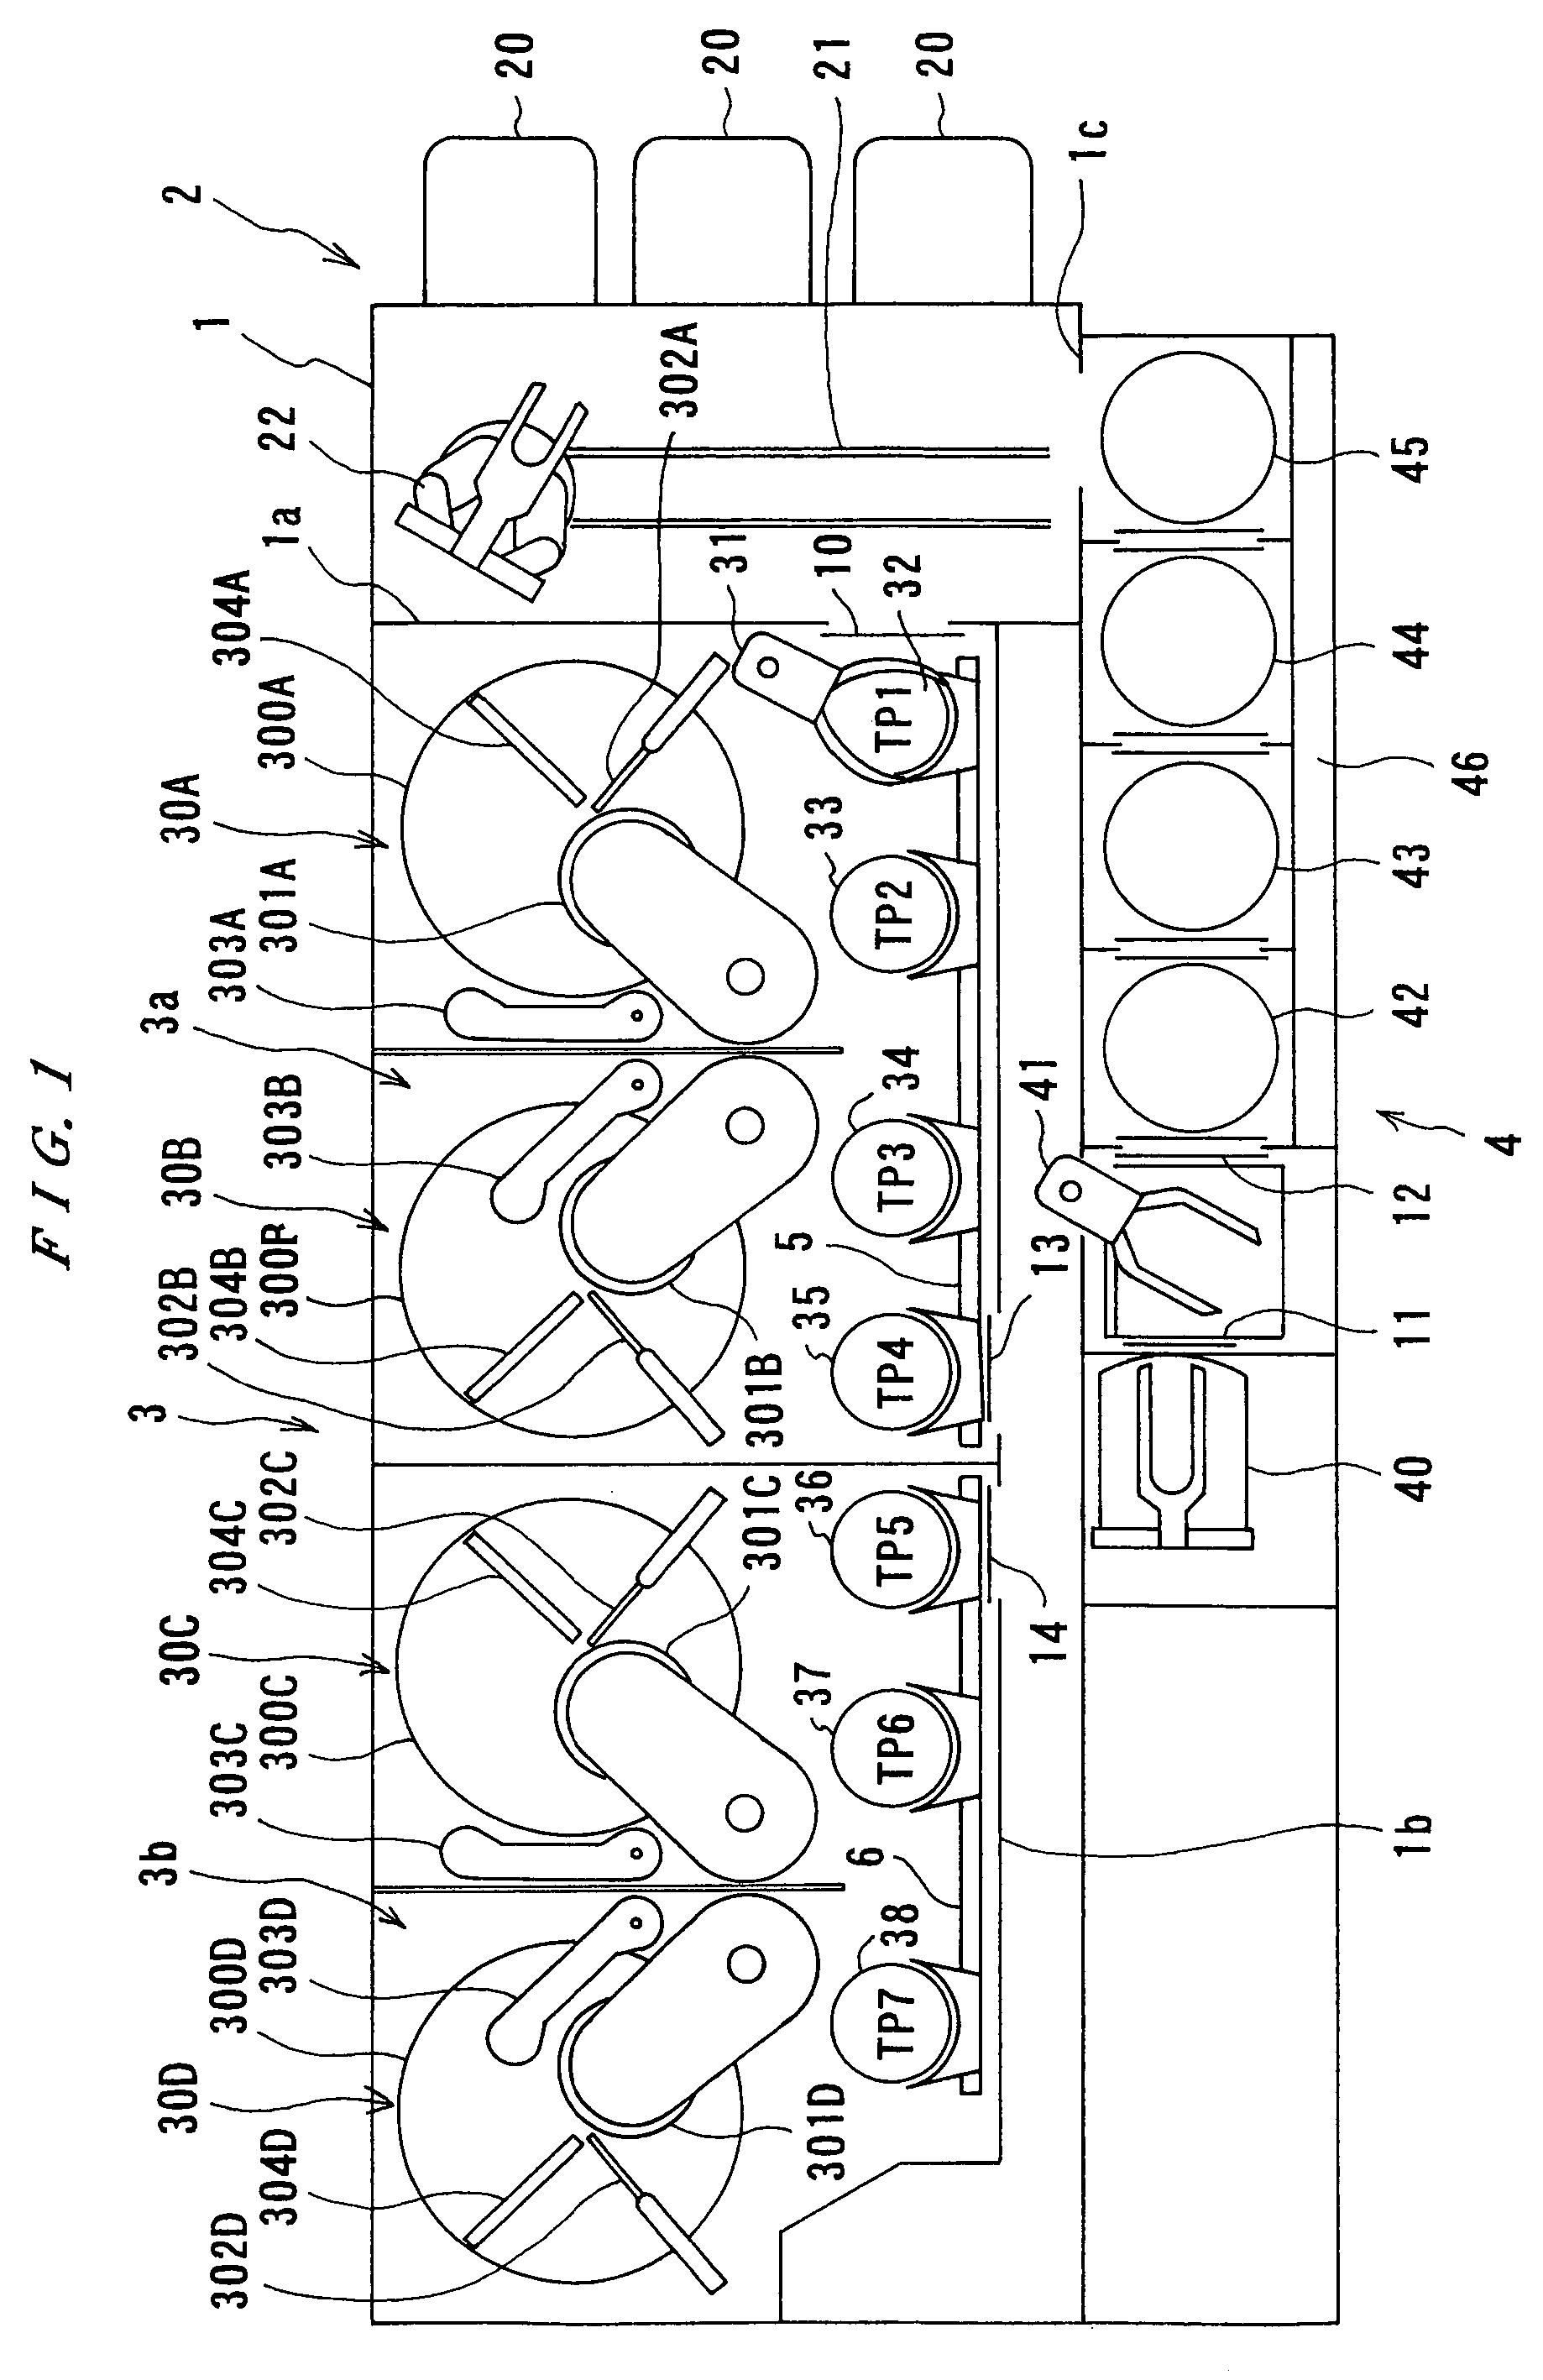 Polishing device and substrate processing device